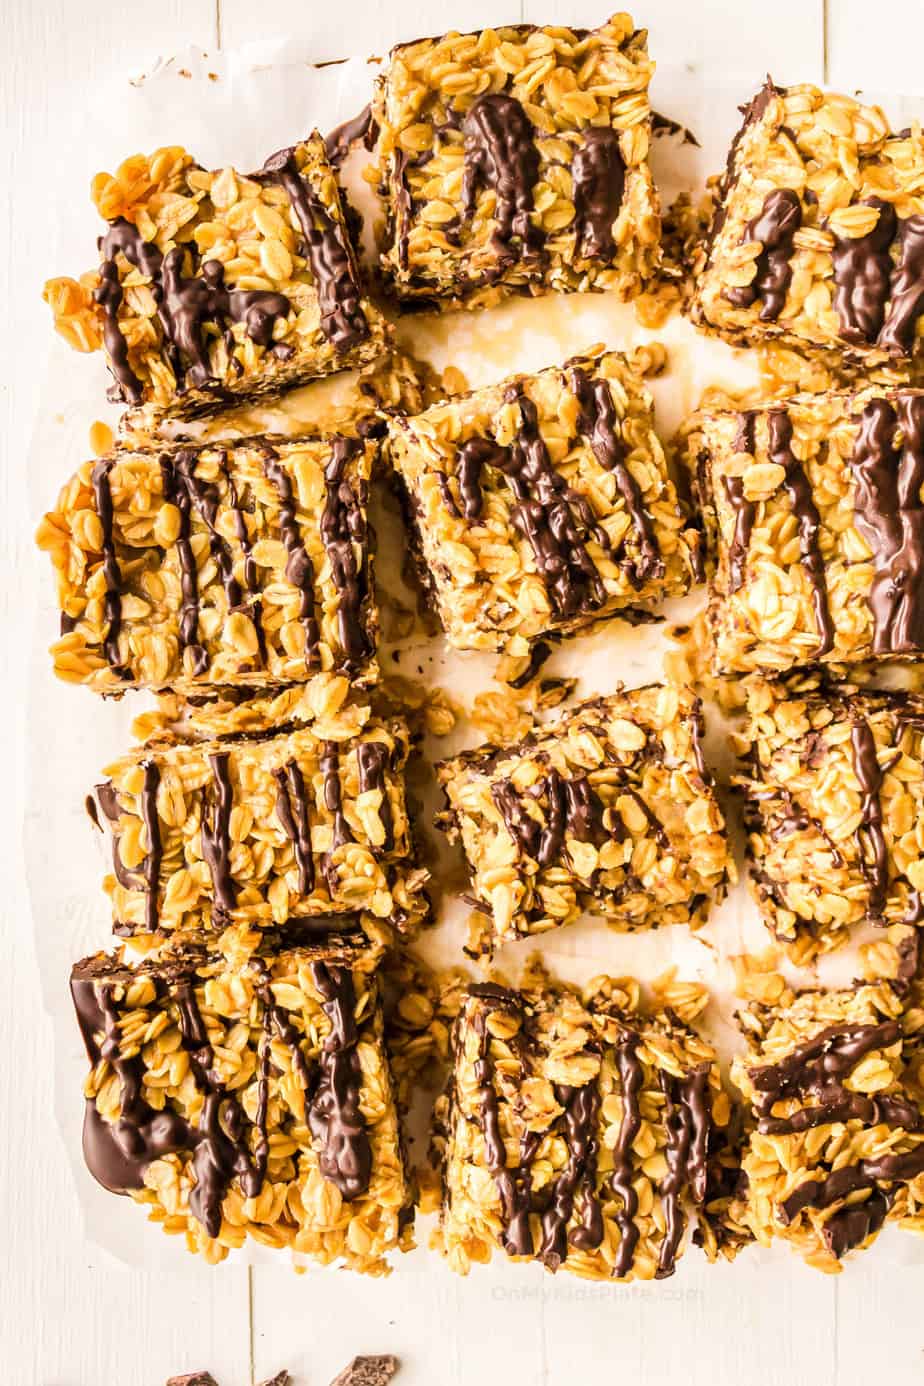 A batch of chocolate oat bars sliced on parchment paper from overhead